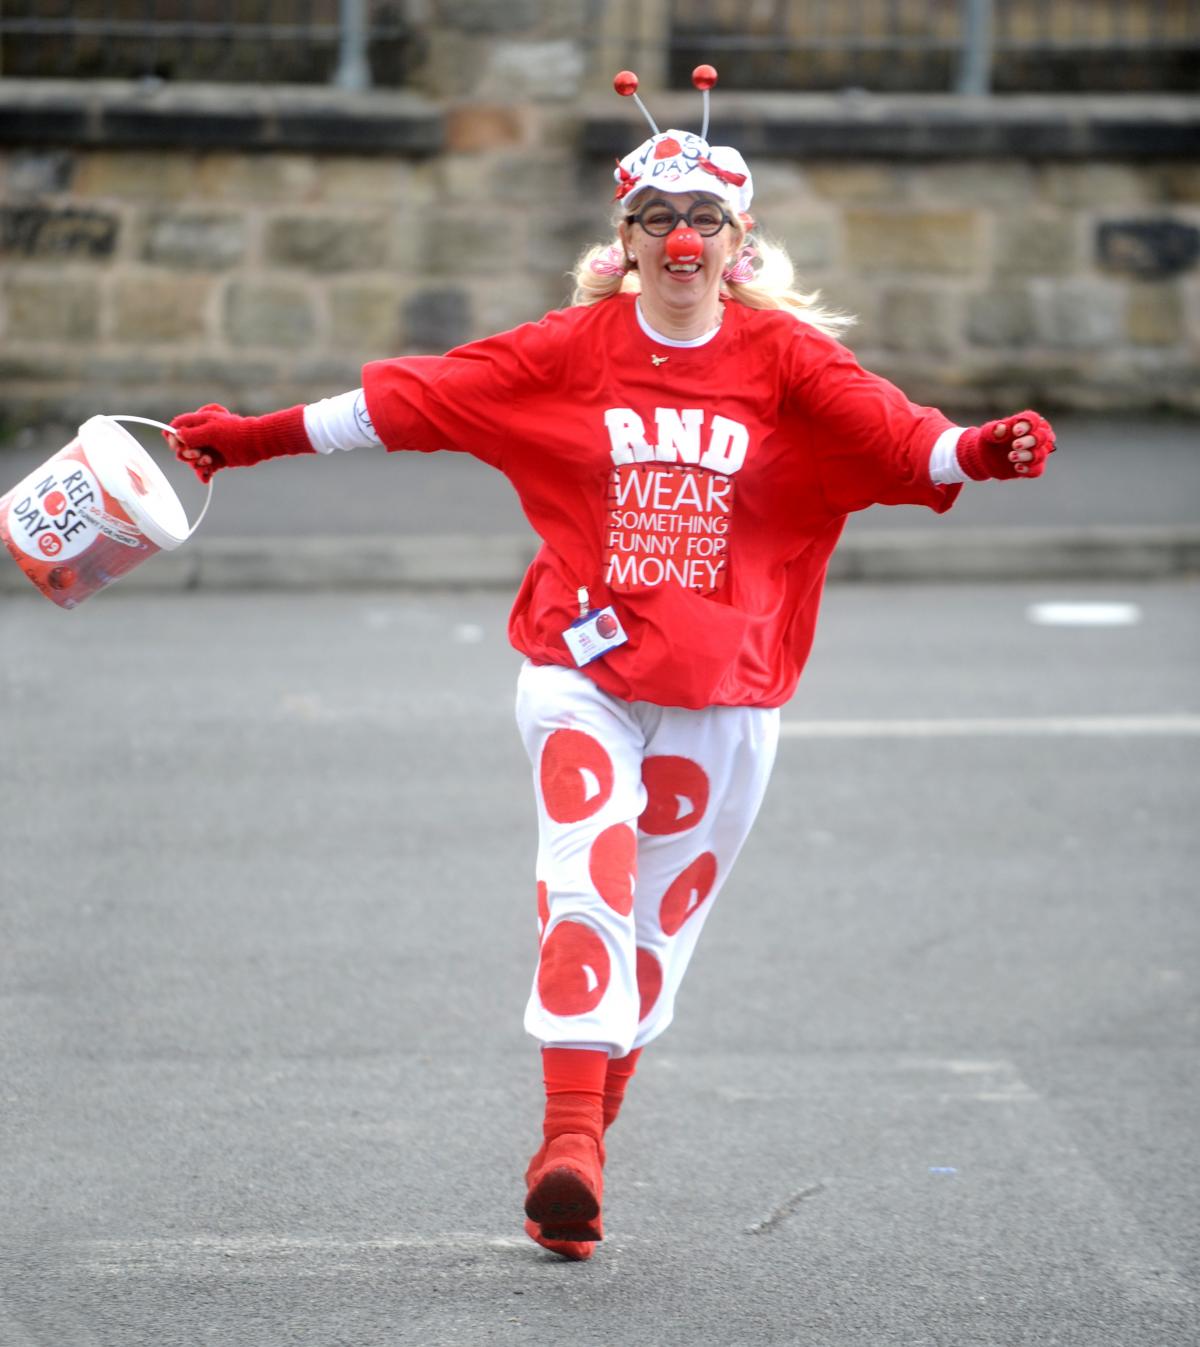 Joanne Ballantyne walked from Baildon to Greengates to raise money for Comic Relief Red Nose Day.